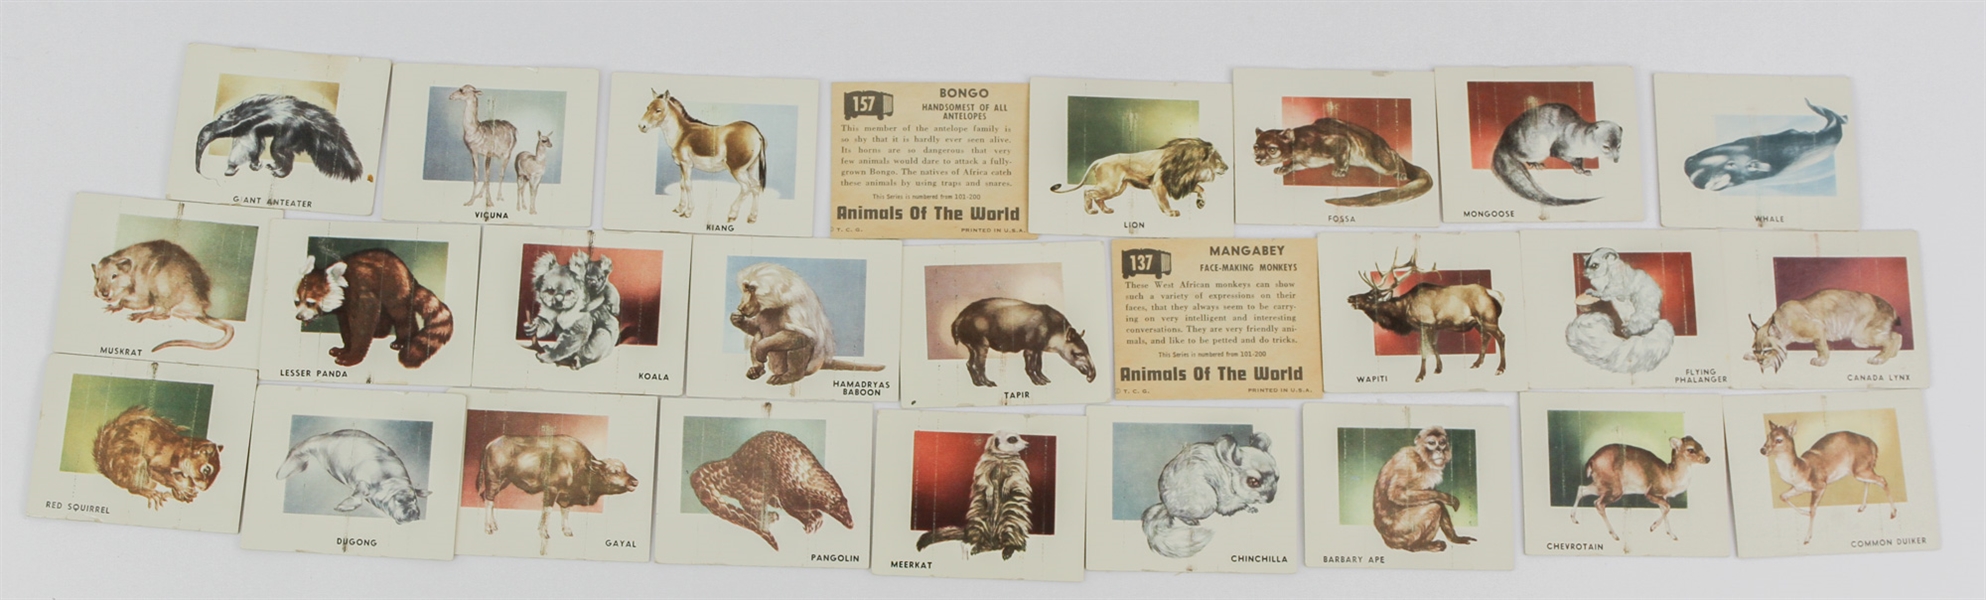 1951 Topps Animals of the World (R714-1) Trading Cards (Lot of 26)